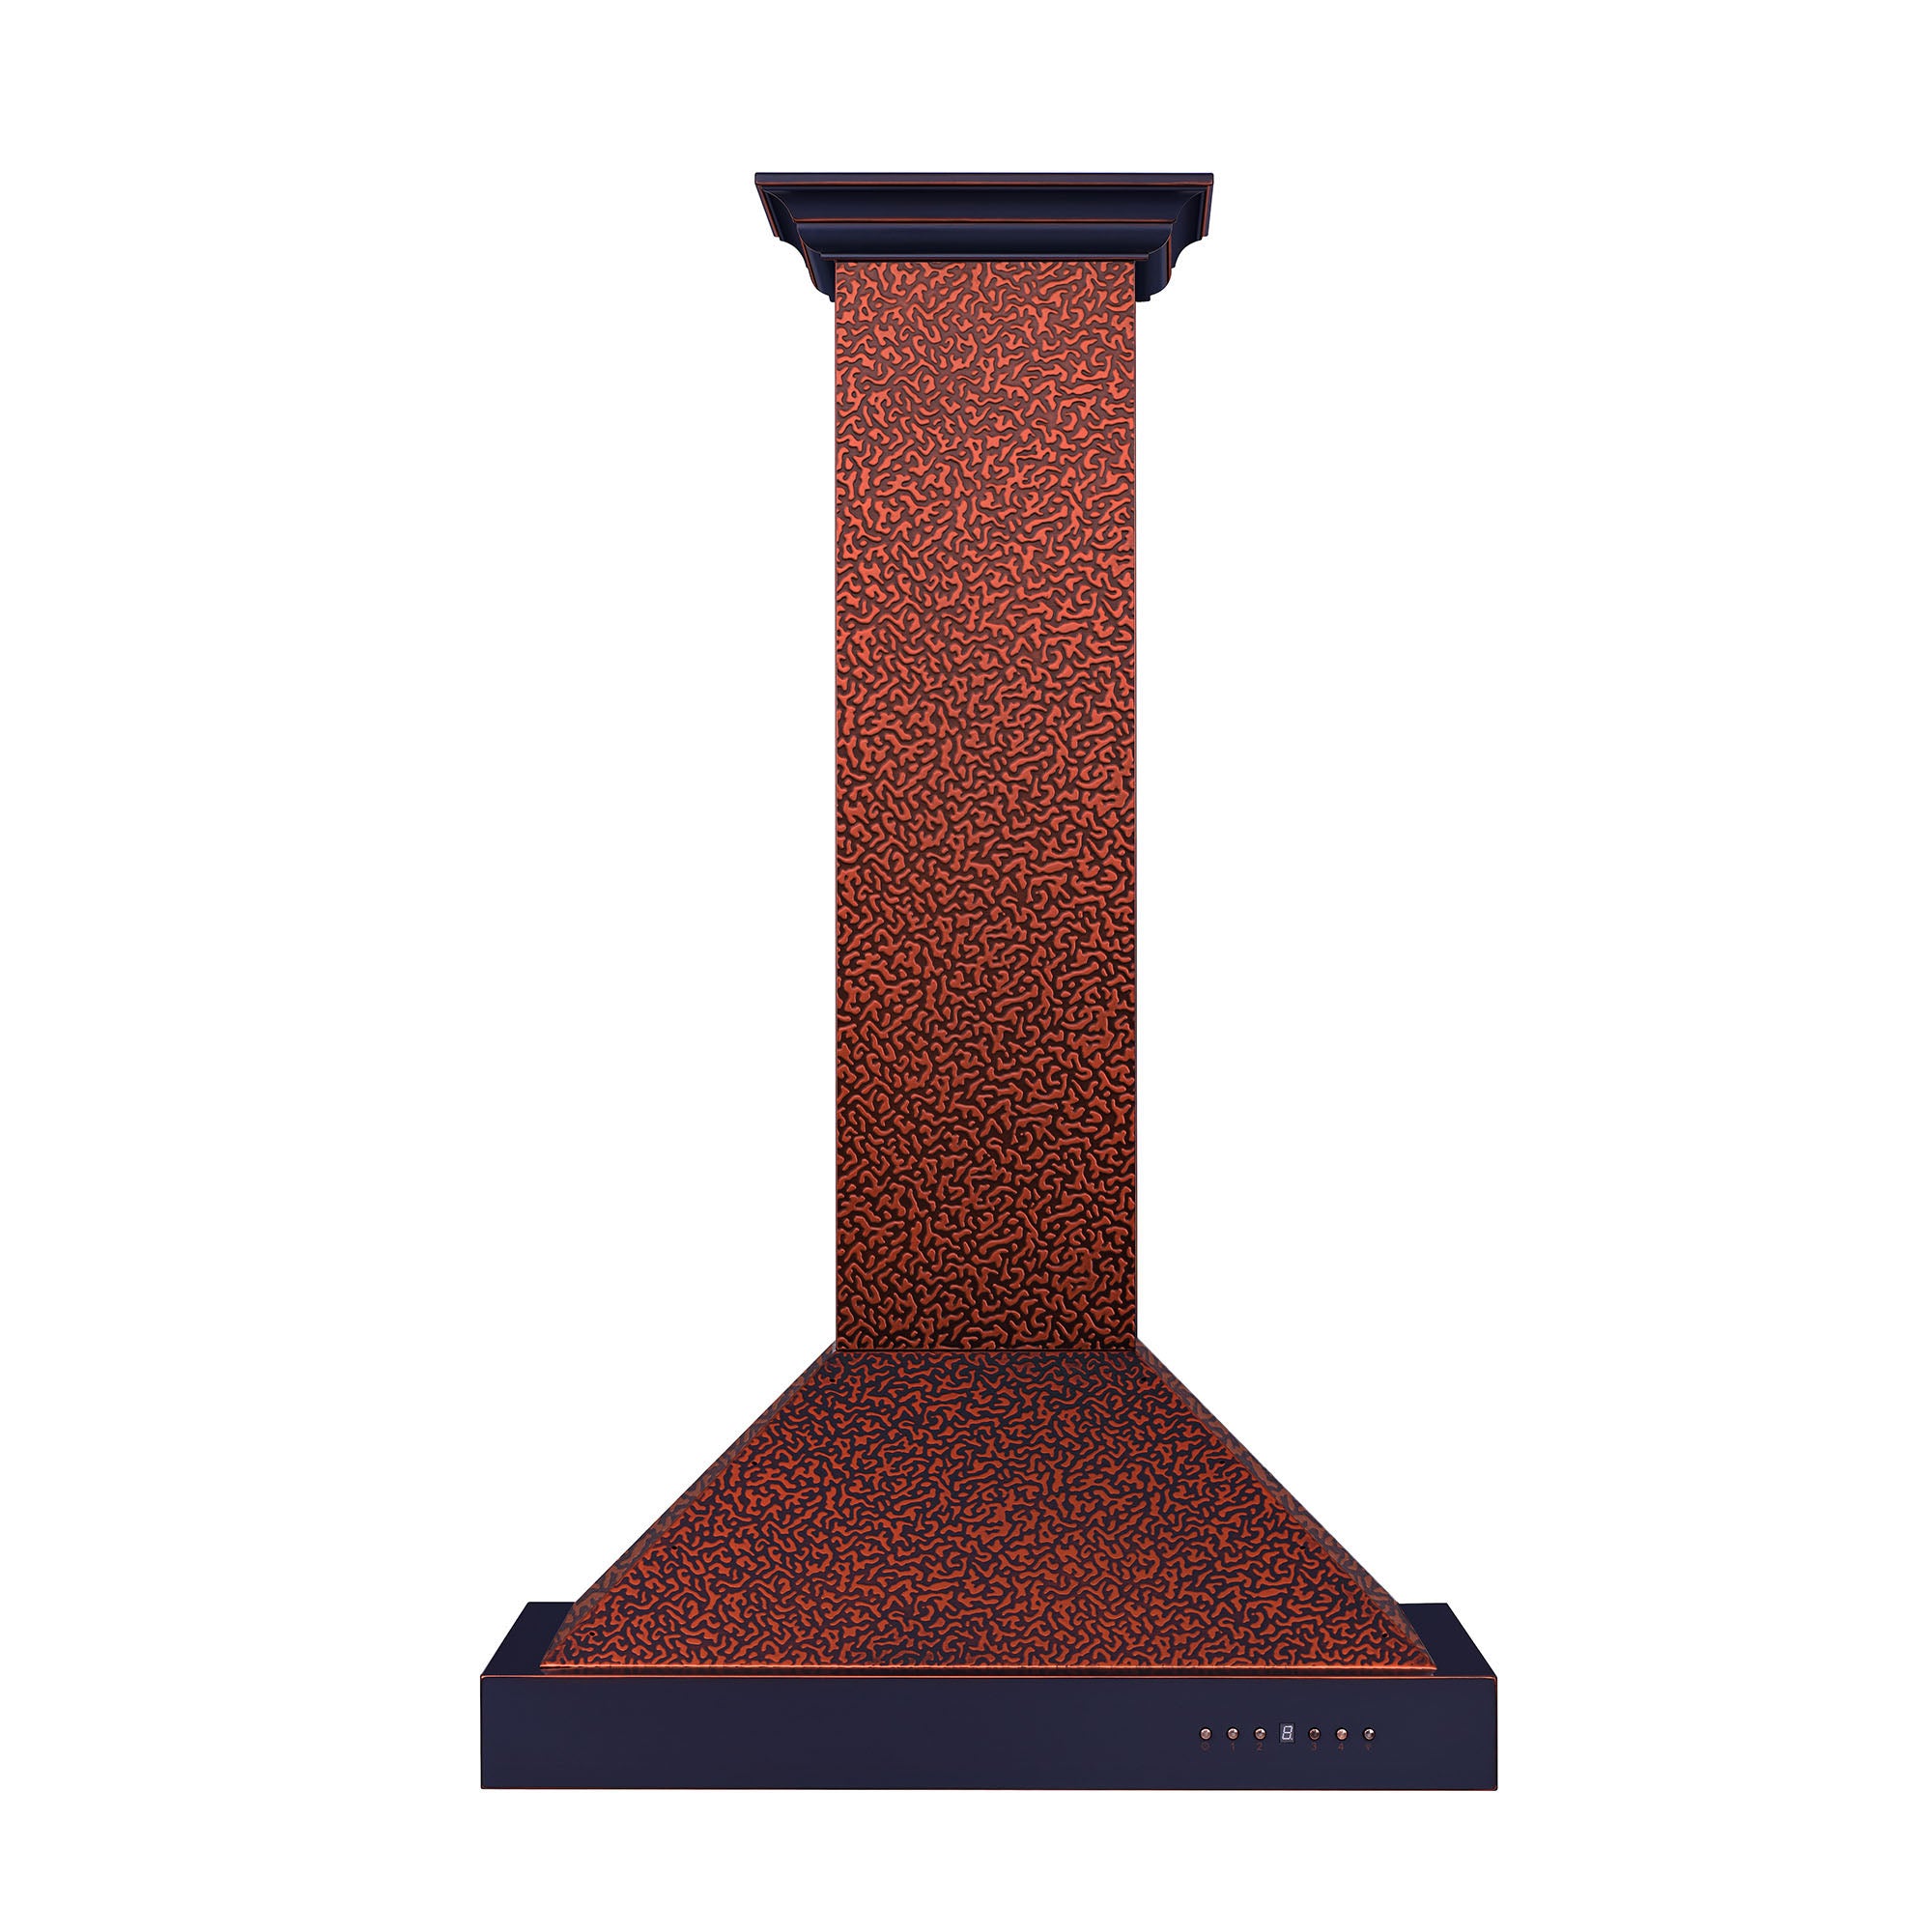 ZLINE Designer Series Wall Mount Range Hood in Embossed Copper with Size Options (KB2-EBXXX)